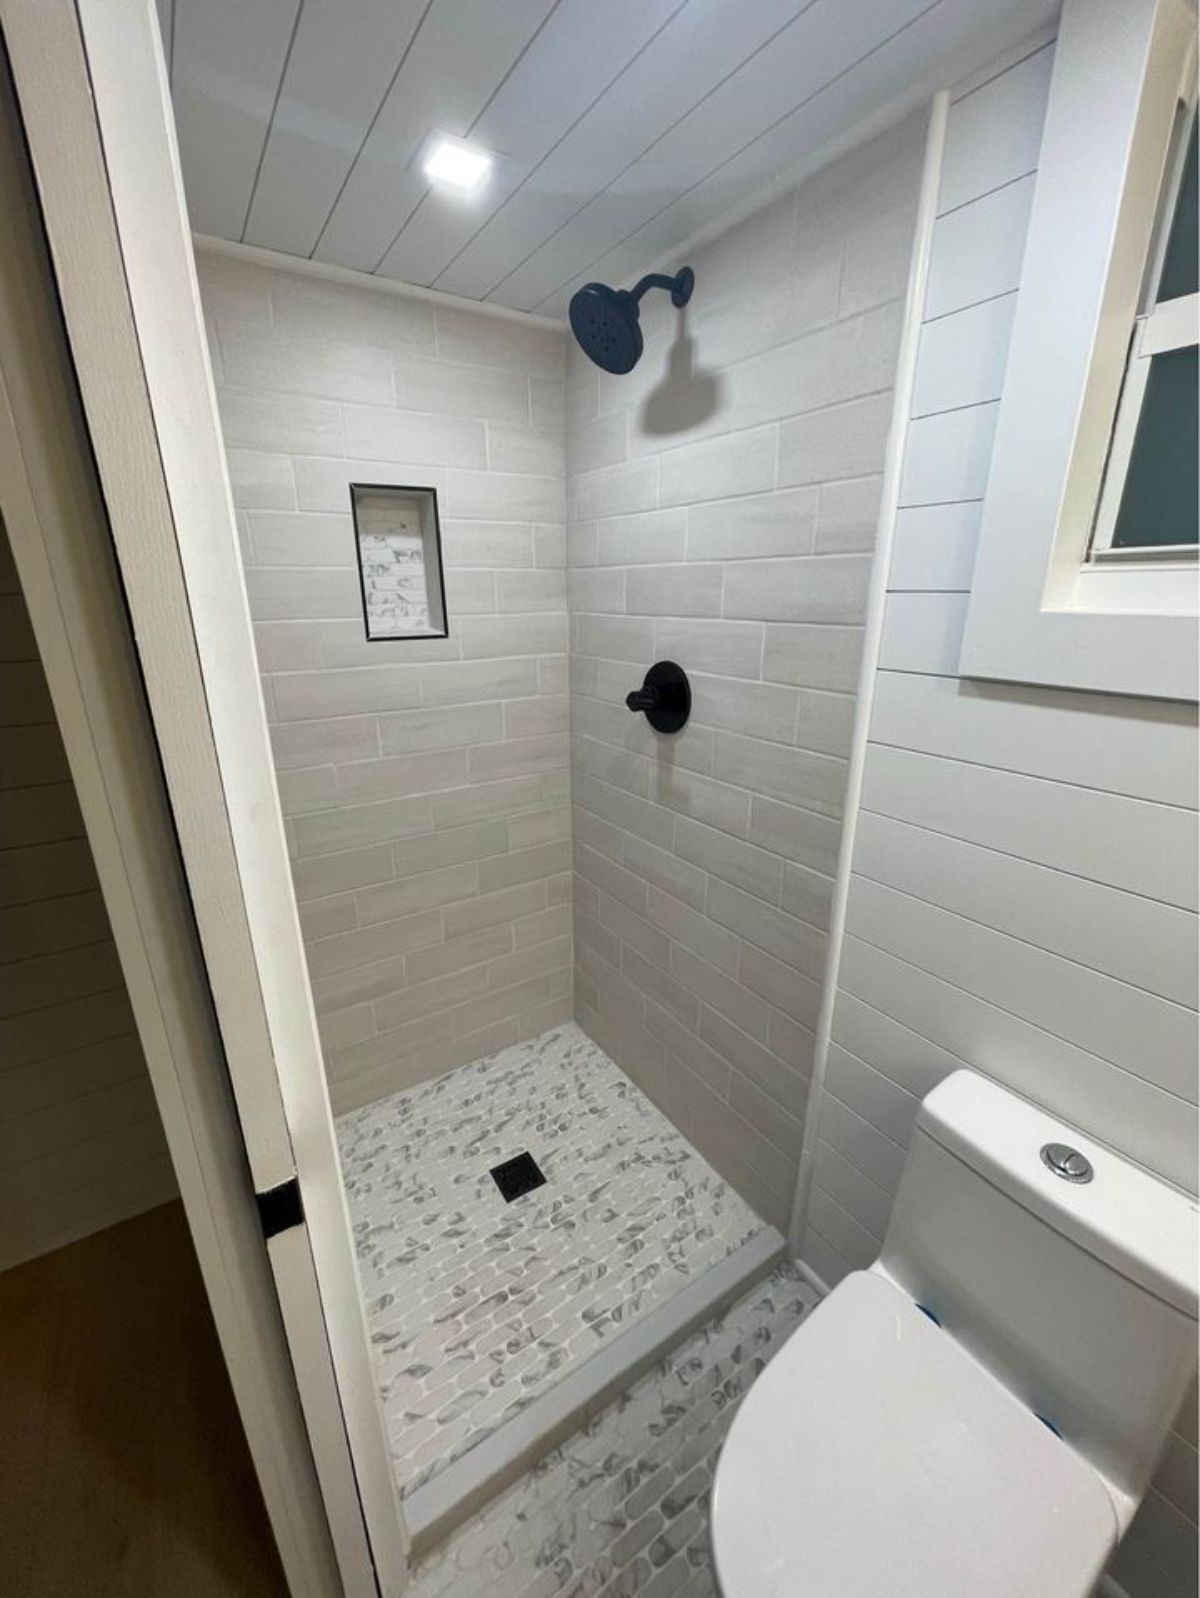 tiled shower stall next to flush toilet with black matte faucet and showerhead